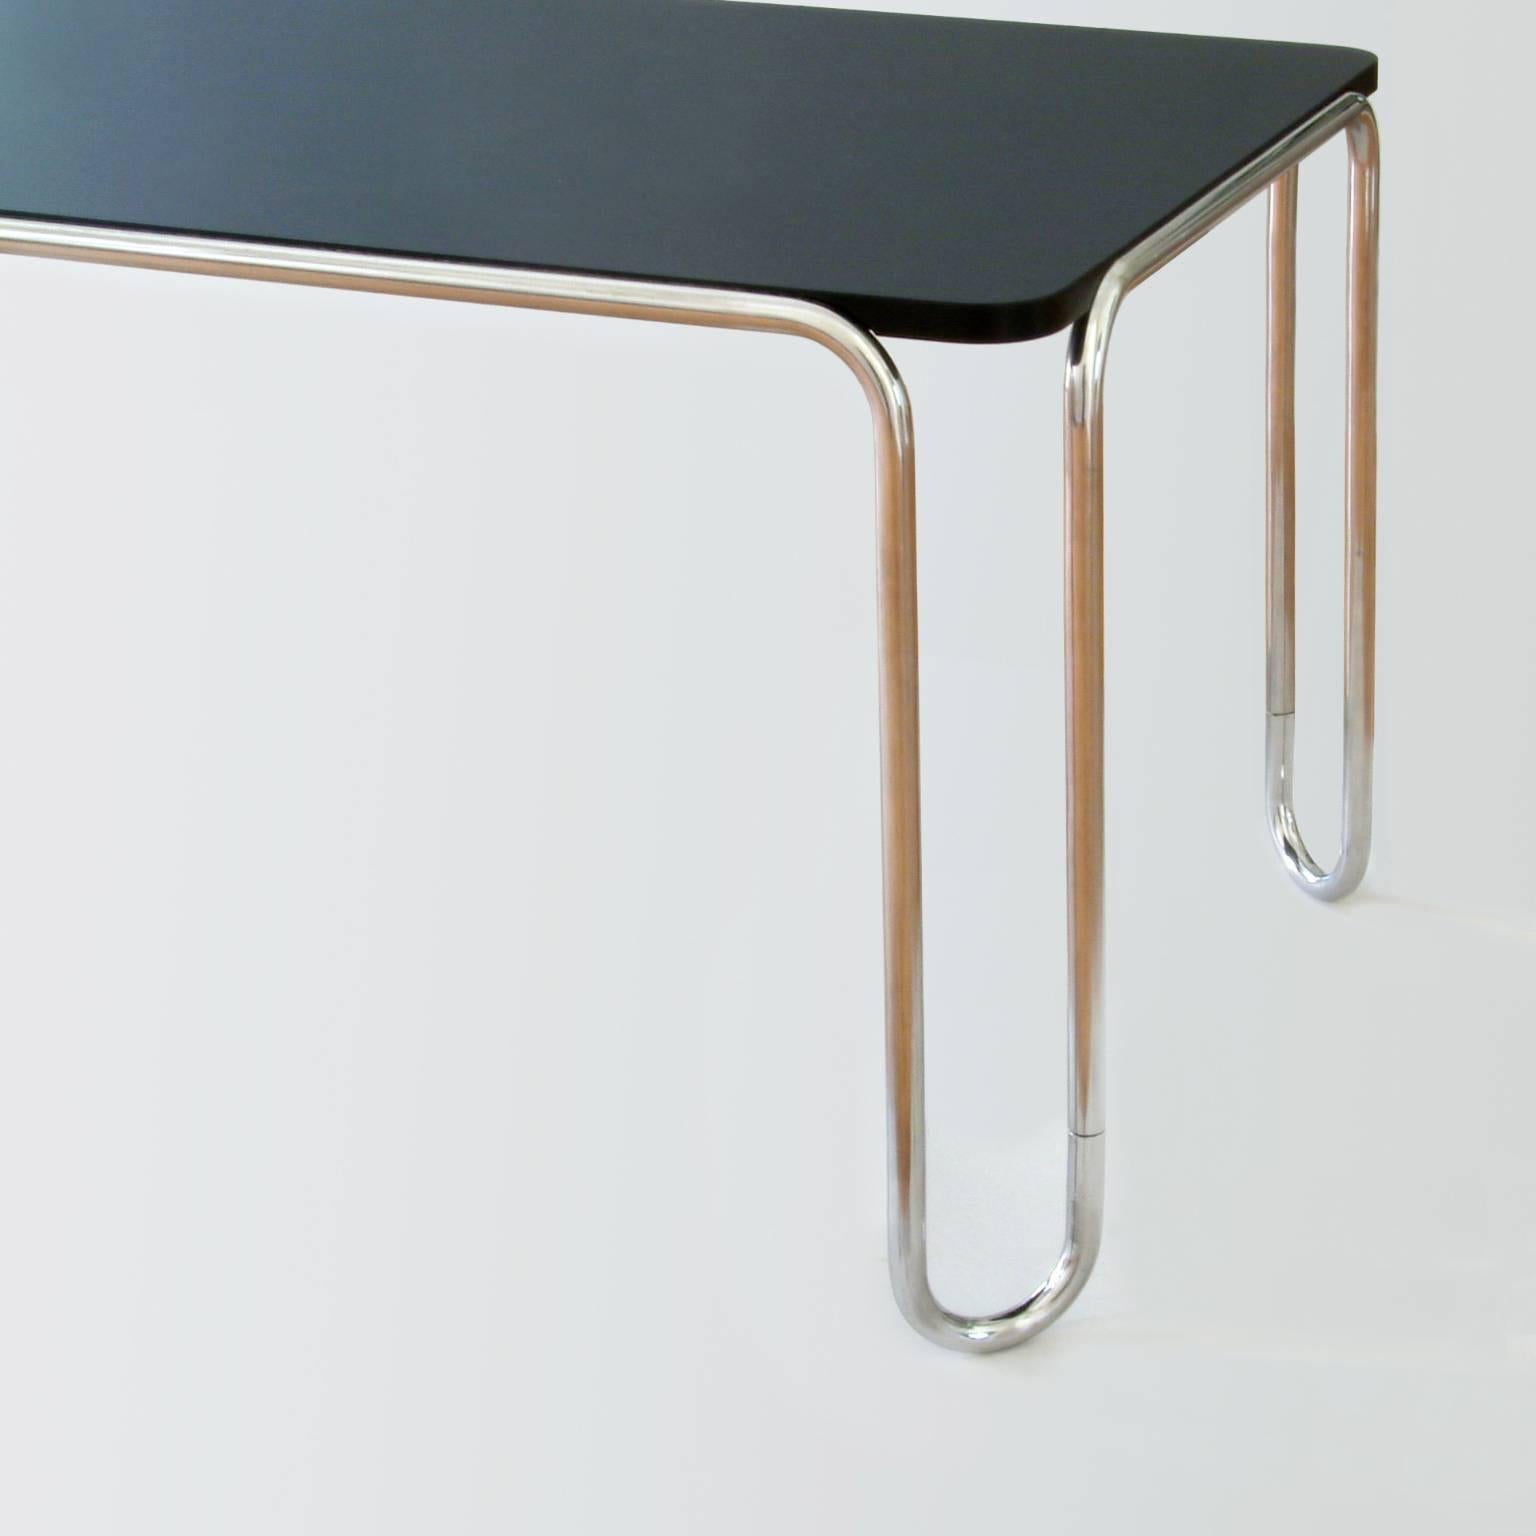 German Modernist Ultra-Thin Tubular-Steel Table by GMD Berlin, Customizable For Sale